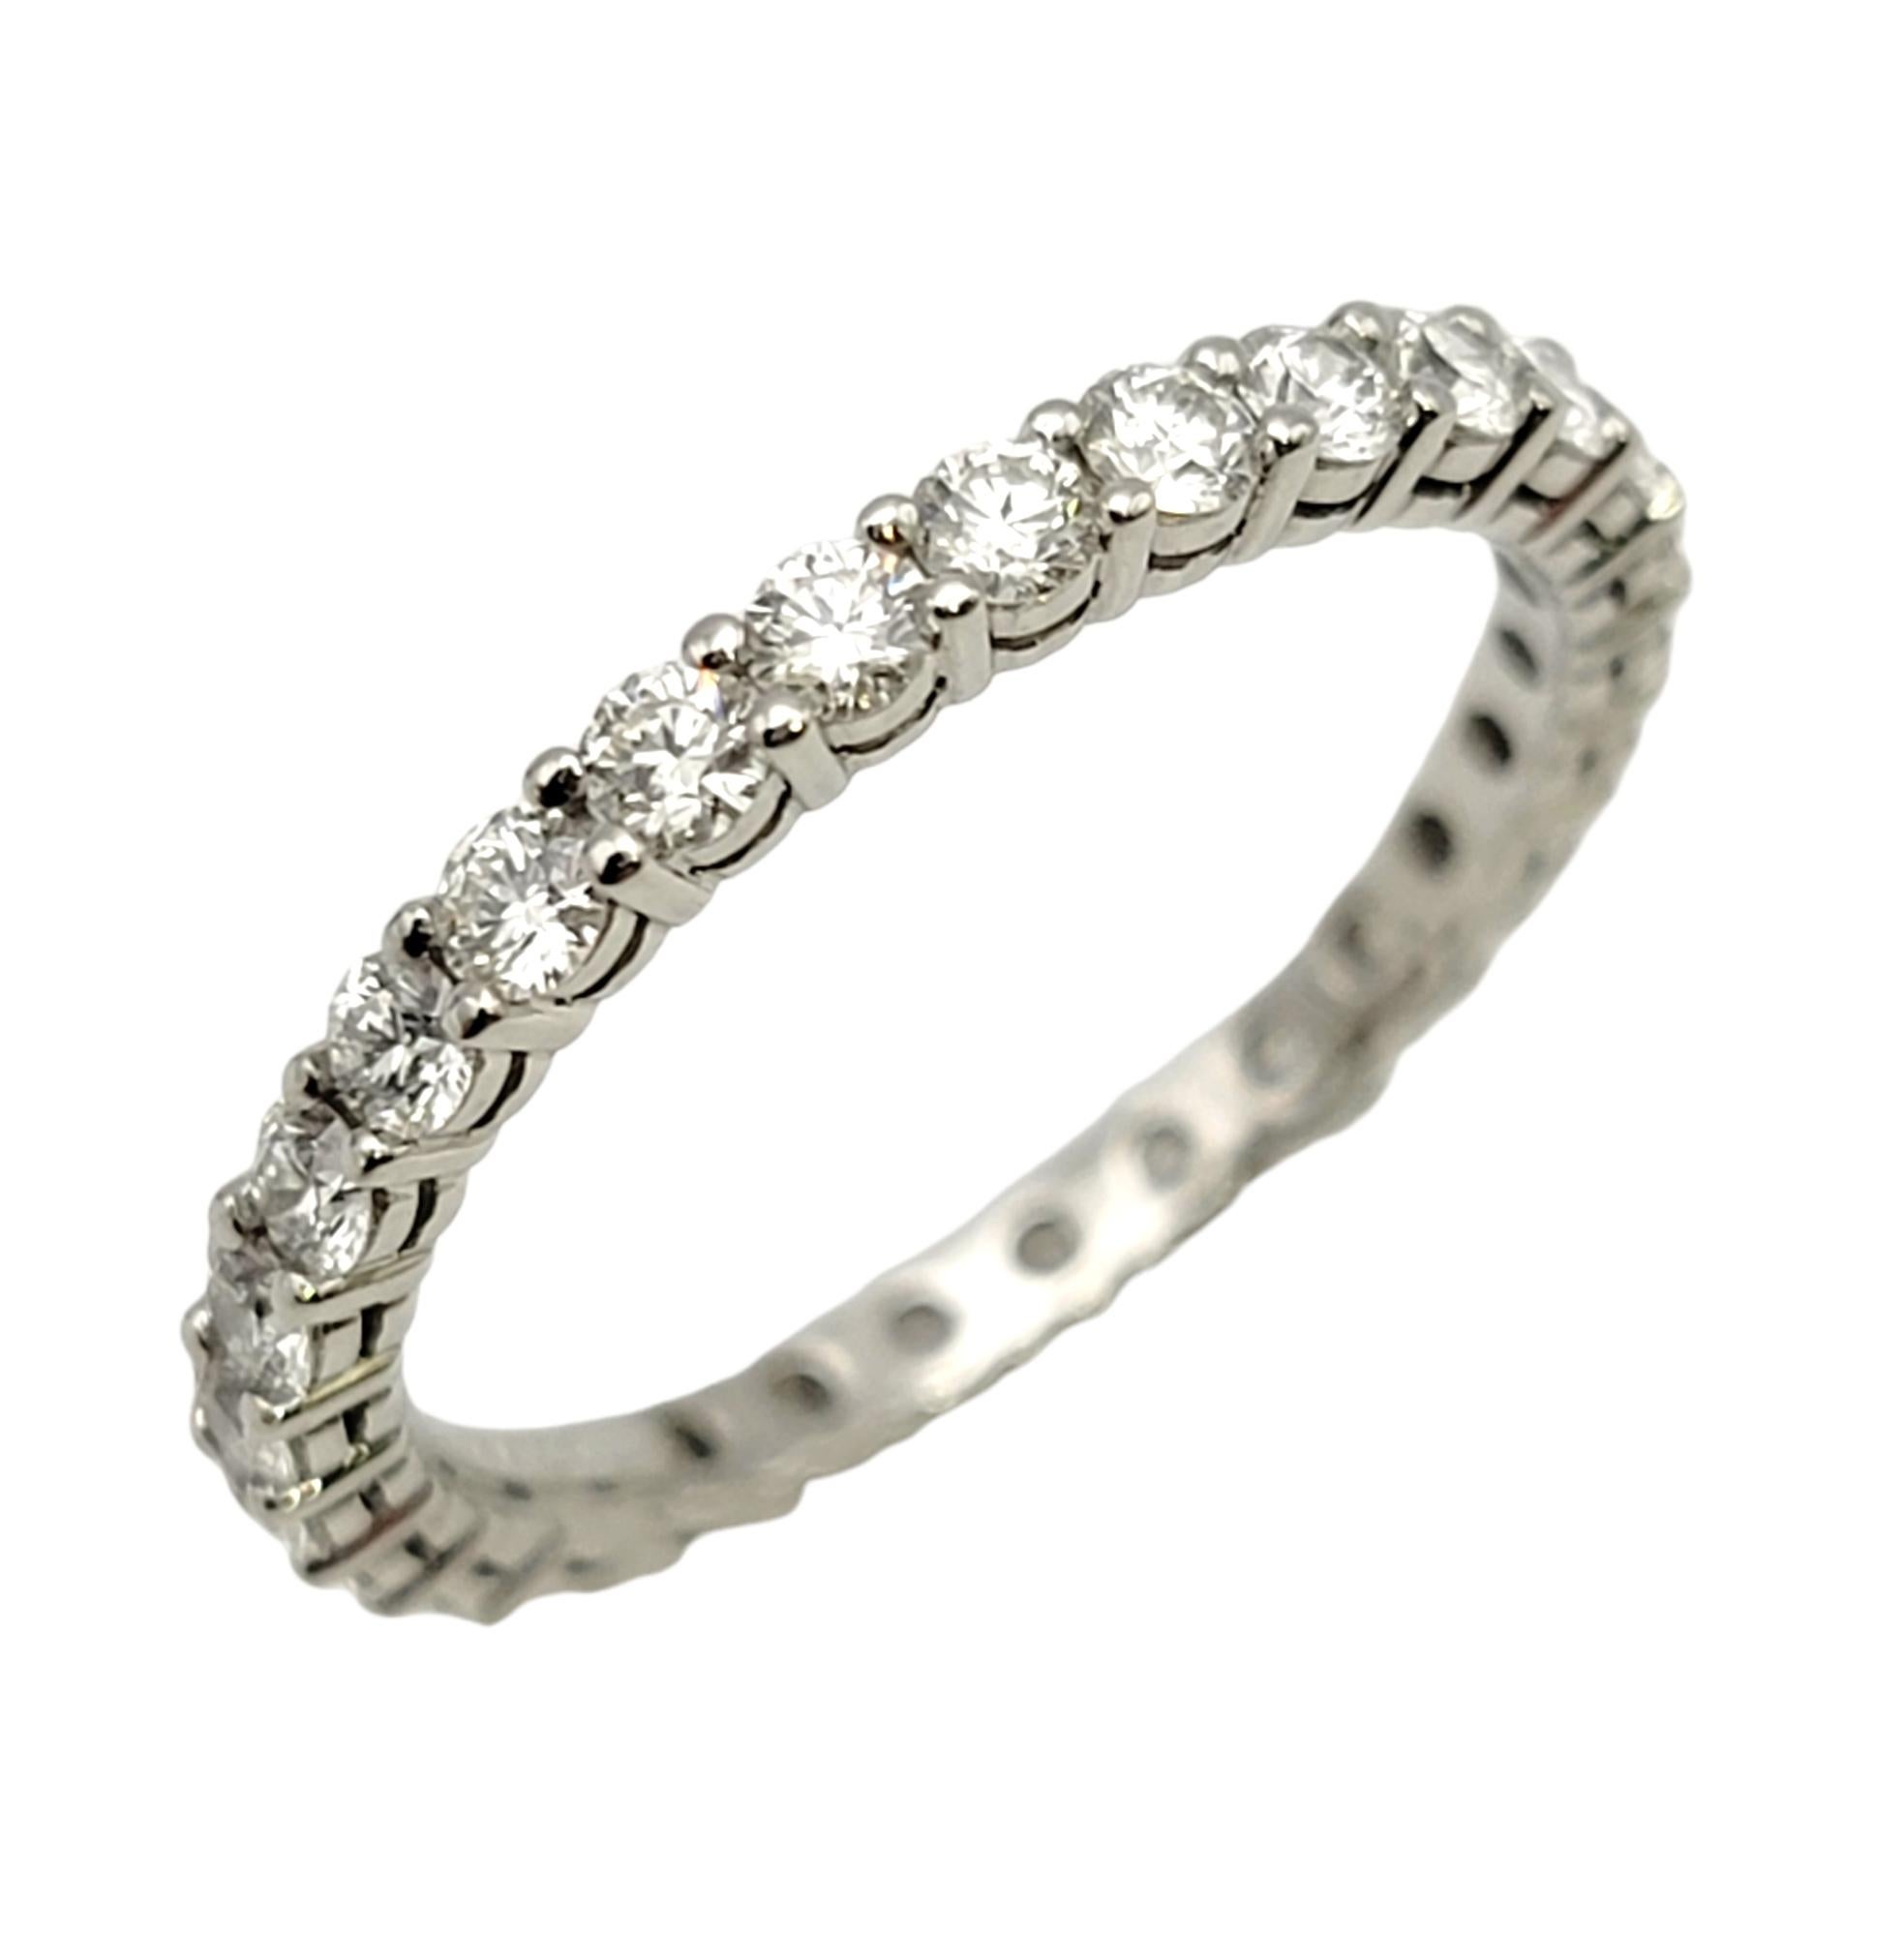 Ring size: 5.75

Stunning Tiffany & Co. diamond 'Embrace' full eternity band ring. This timeless beauty features 28 icy white round diamonds prong set along the entire piece in single elegant row. It would be perfect paired with an engagement ring,